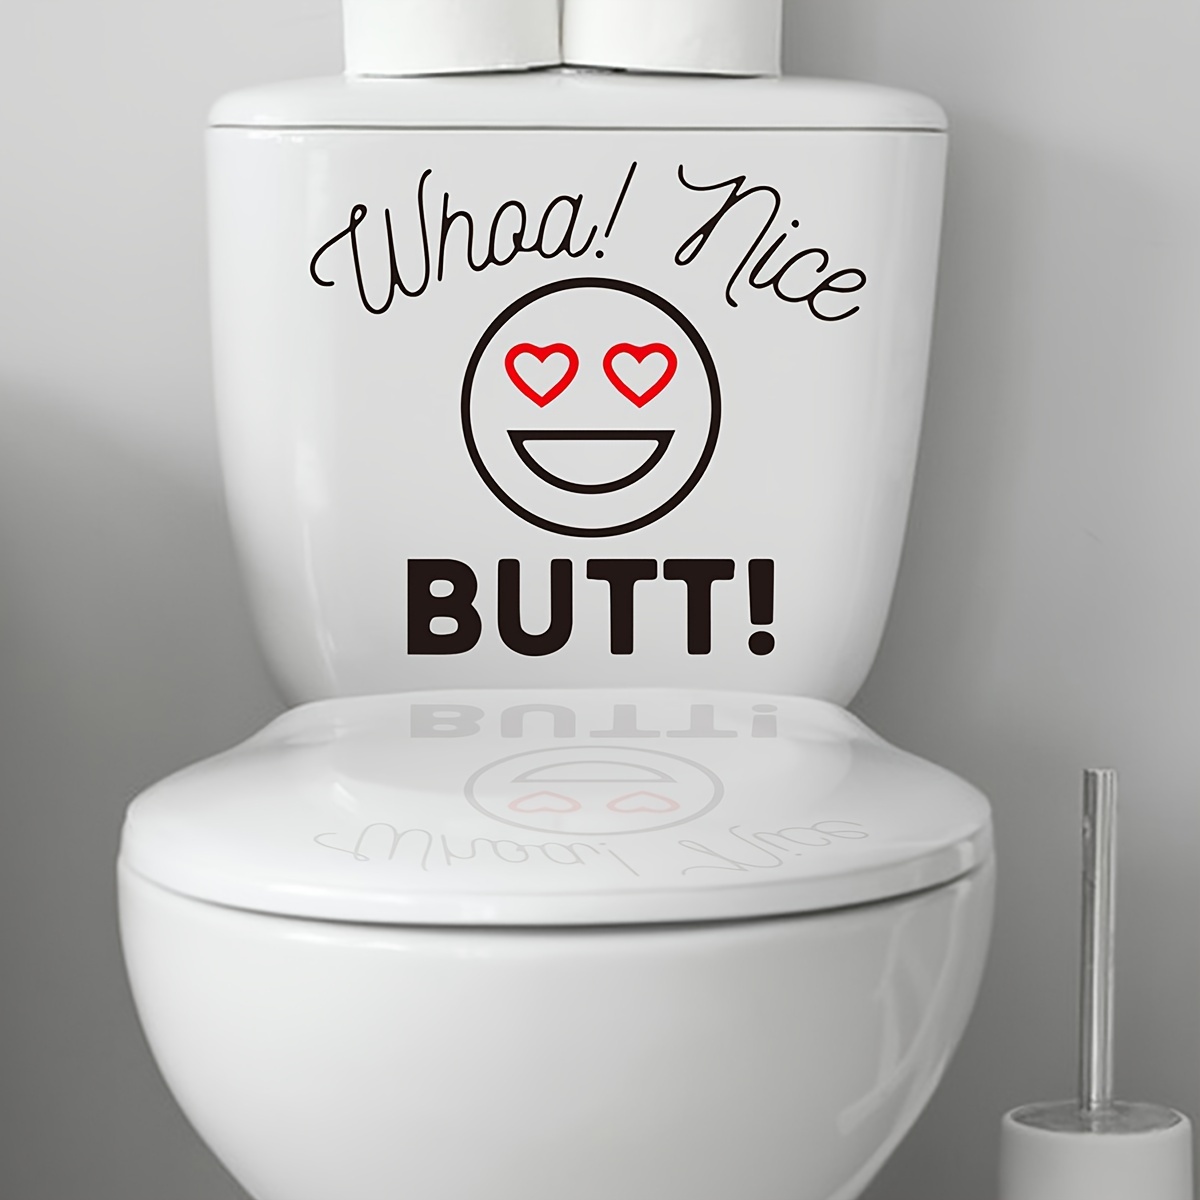 Krinisou Toilet Stickers Lid Decals Funny, Nice Butt Toilet Seat Sticker  Bathroom Decals for Toilet